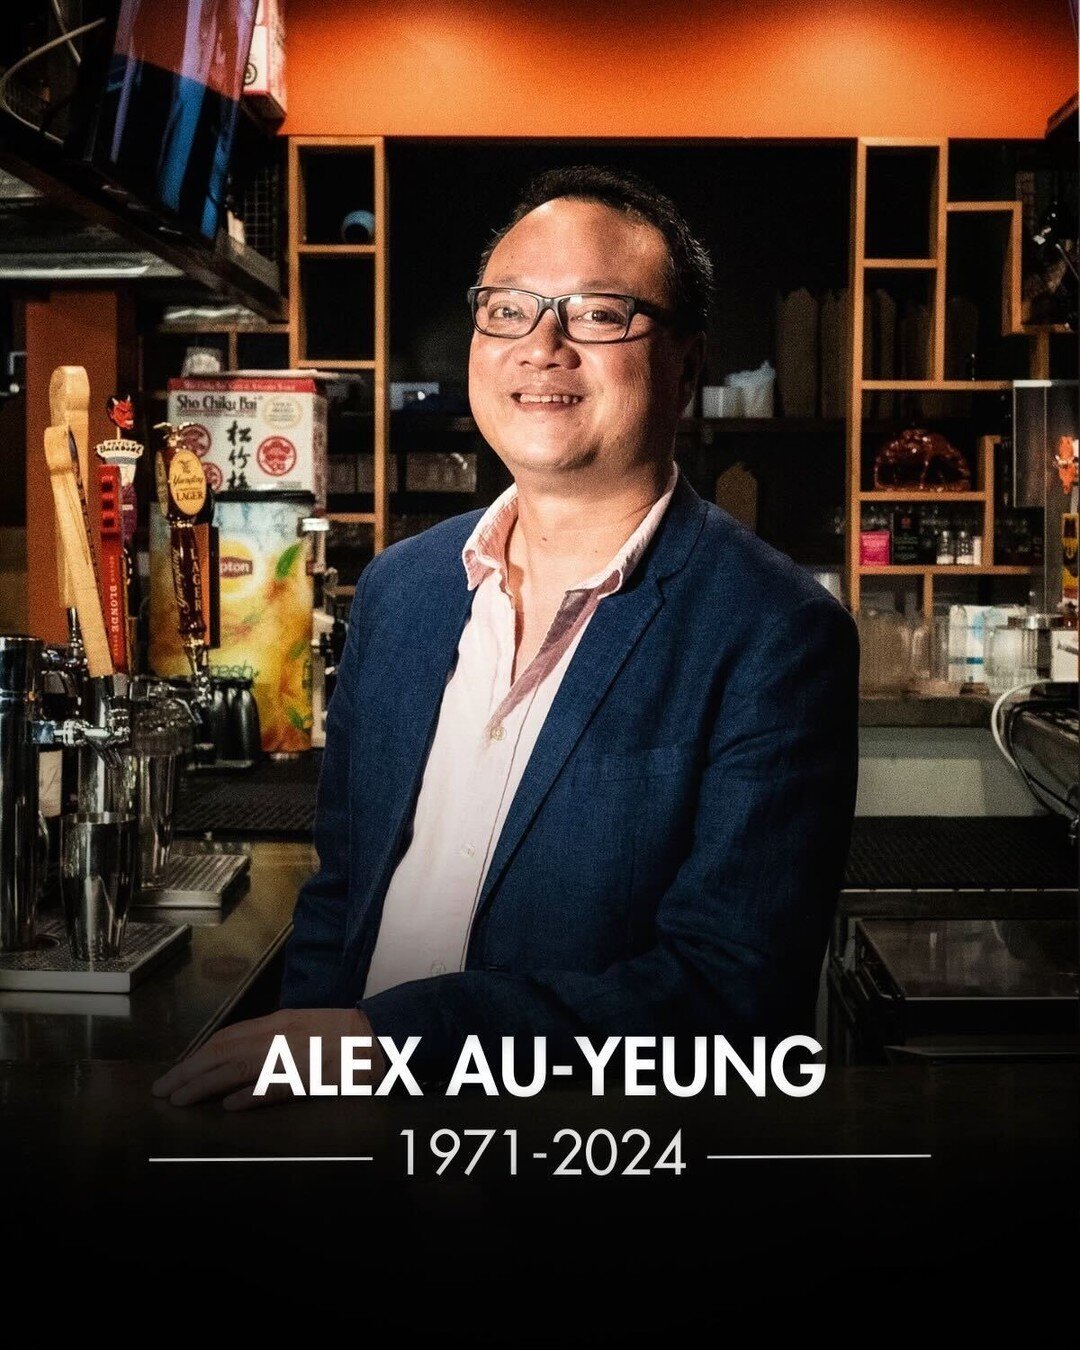 With heavy hearts, we share the news that our dear friend and client, Alex Au-Yeung, chef and owner of Phat Eatery, has passed. Over the past months, Alex bravely fought a private battle with cancer. Despite his struggles, he continued to pour his he